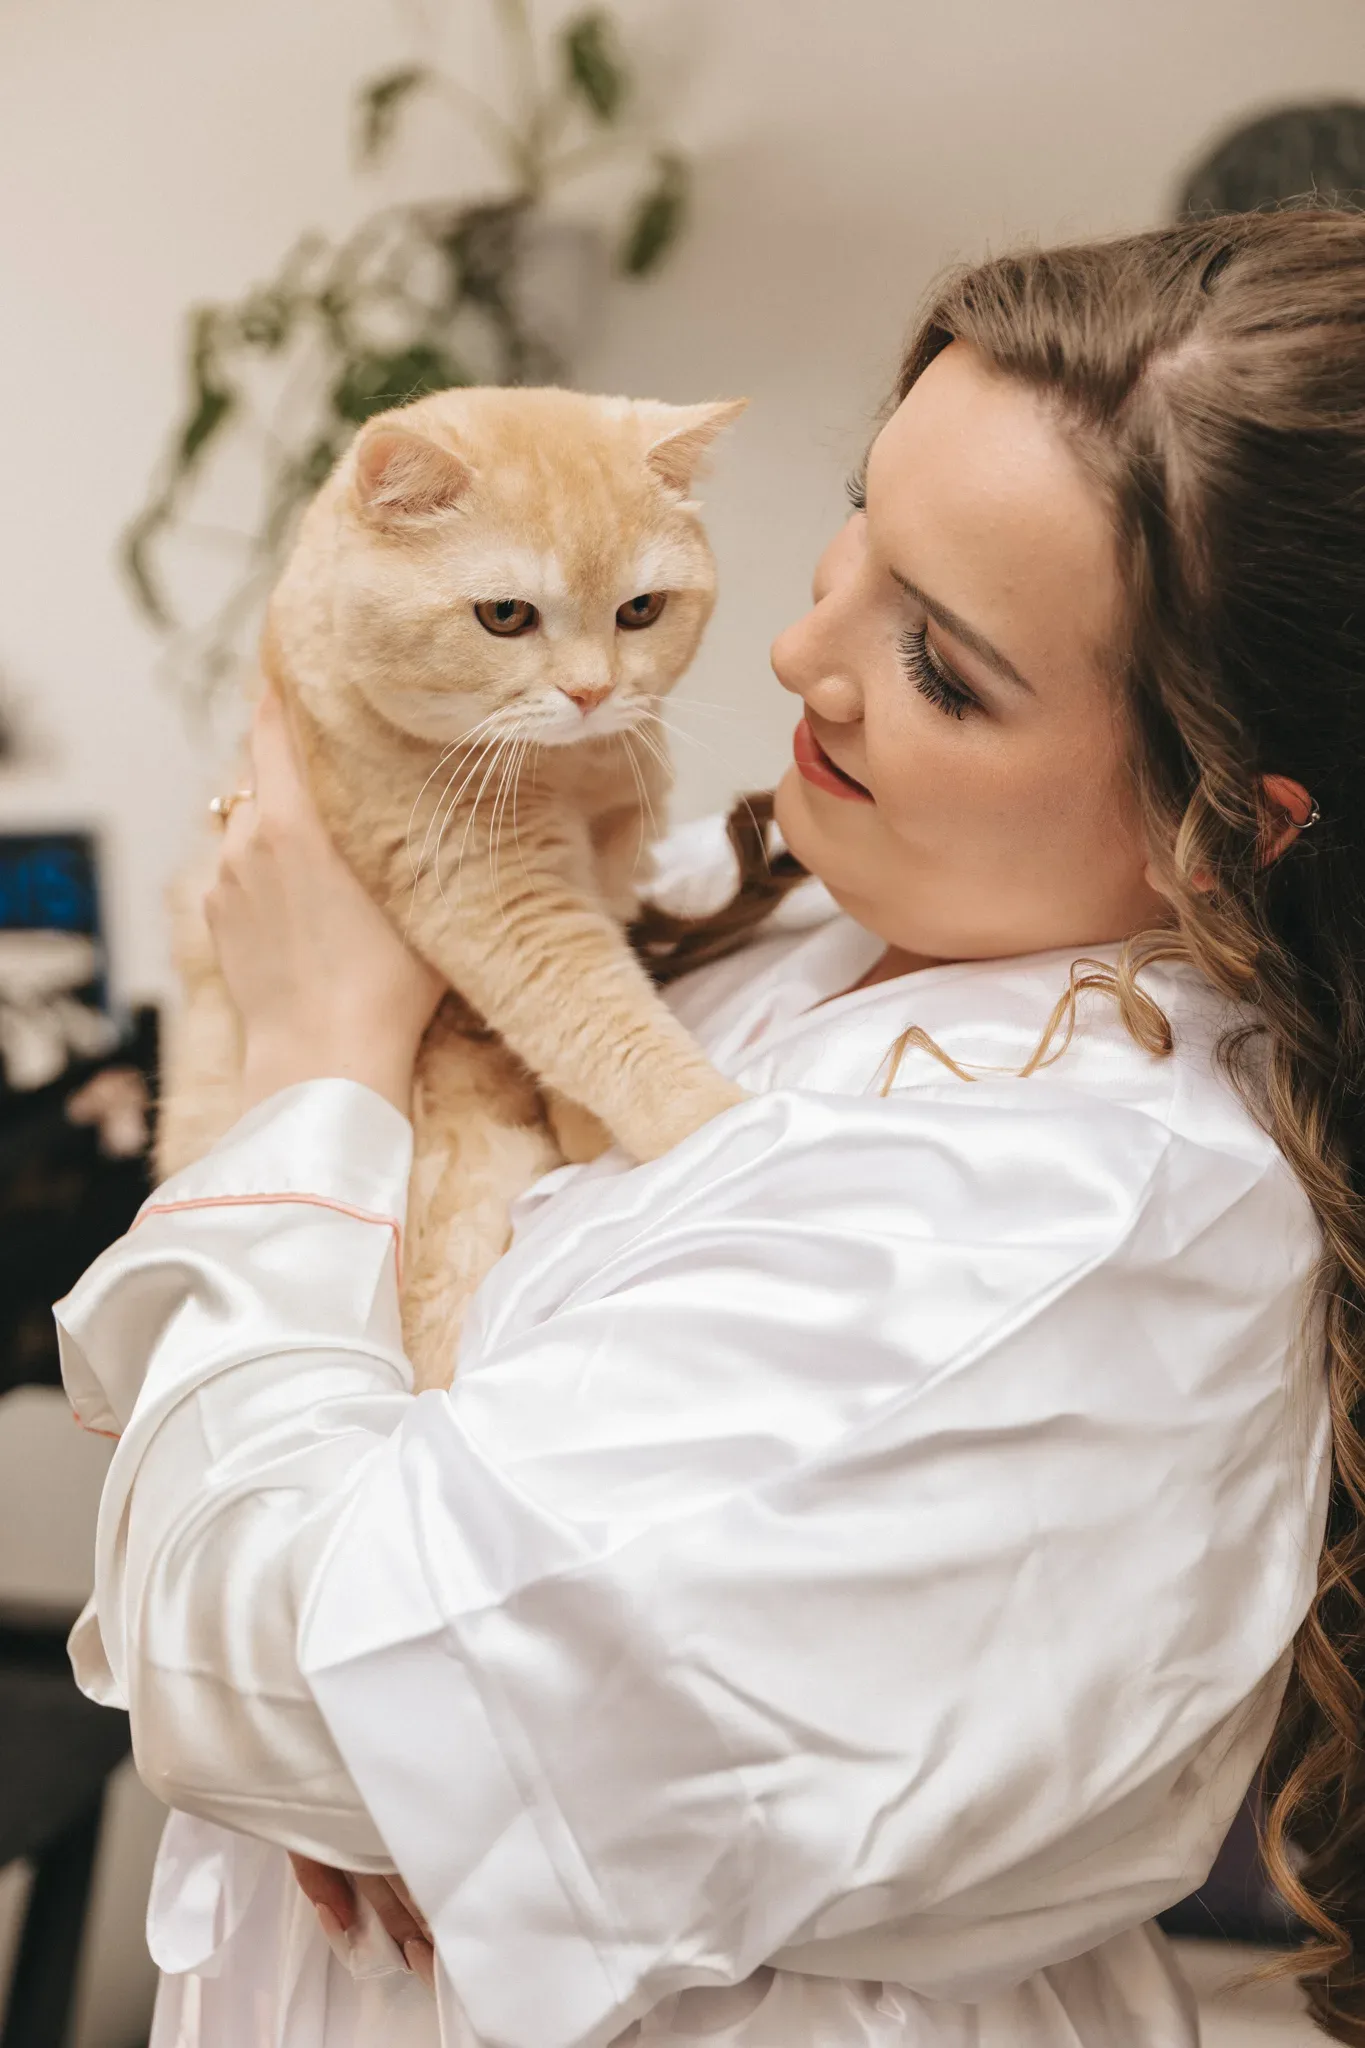 A woman in a white robe holds a chubby orange cat with a displeased expression. they are indoors, with soft focus on a cluttered background with plants.